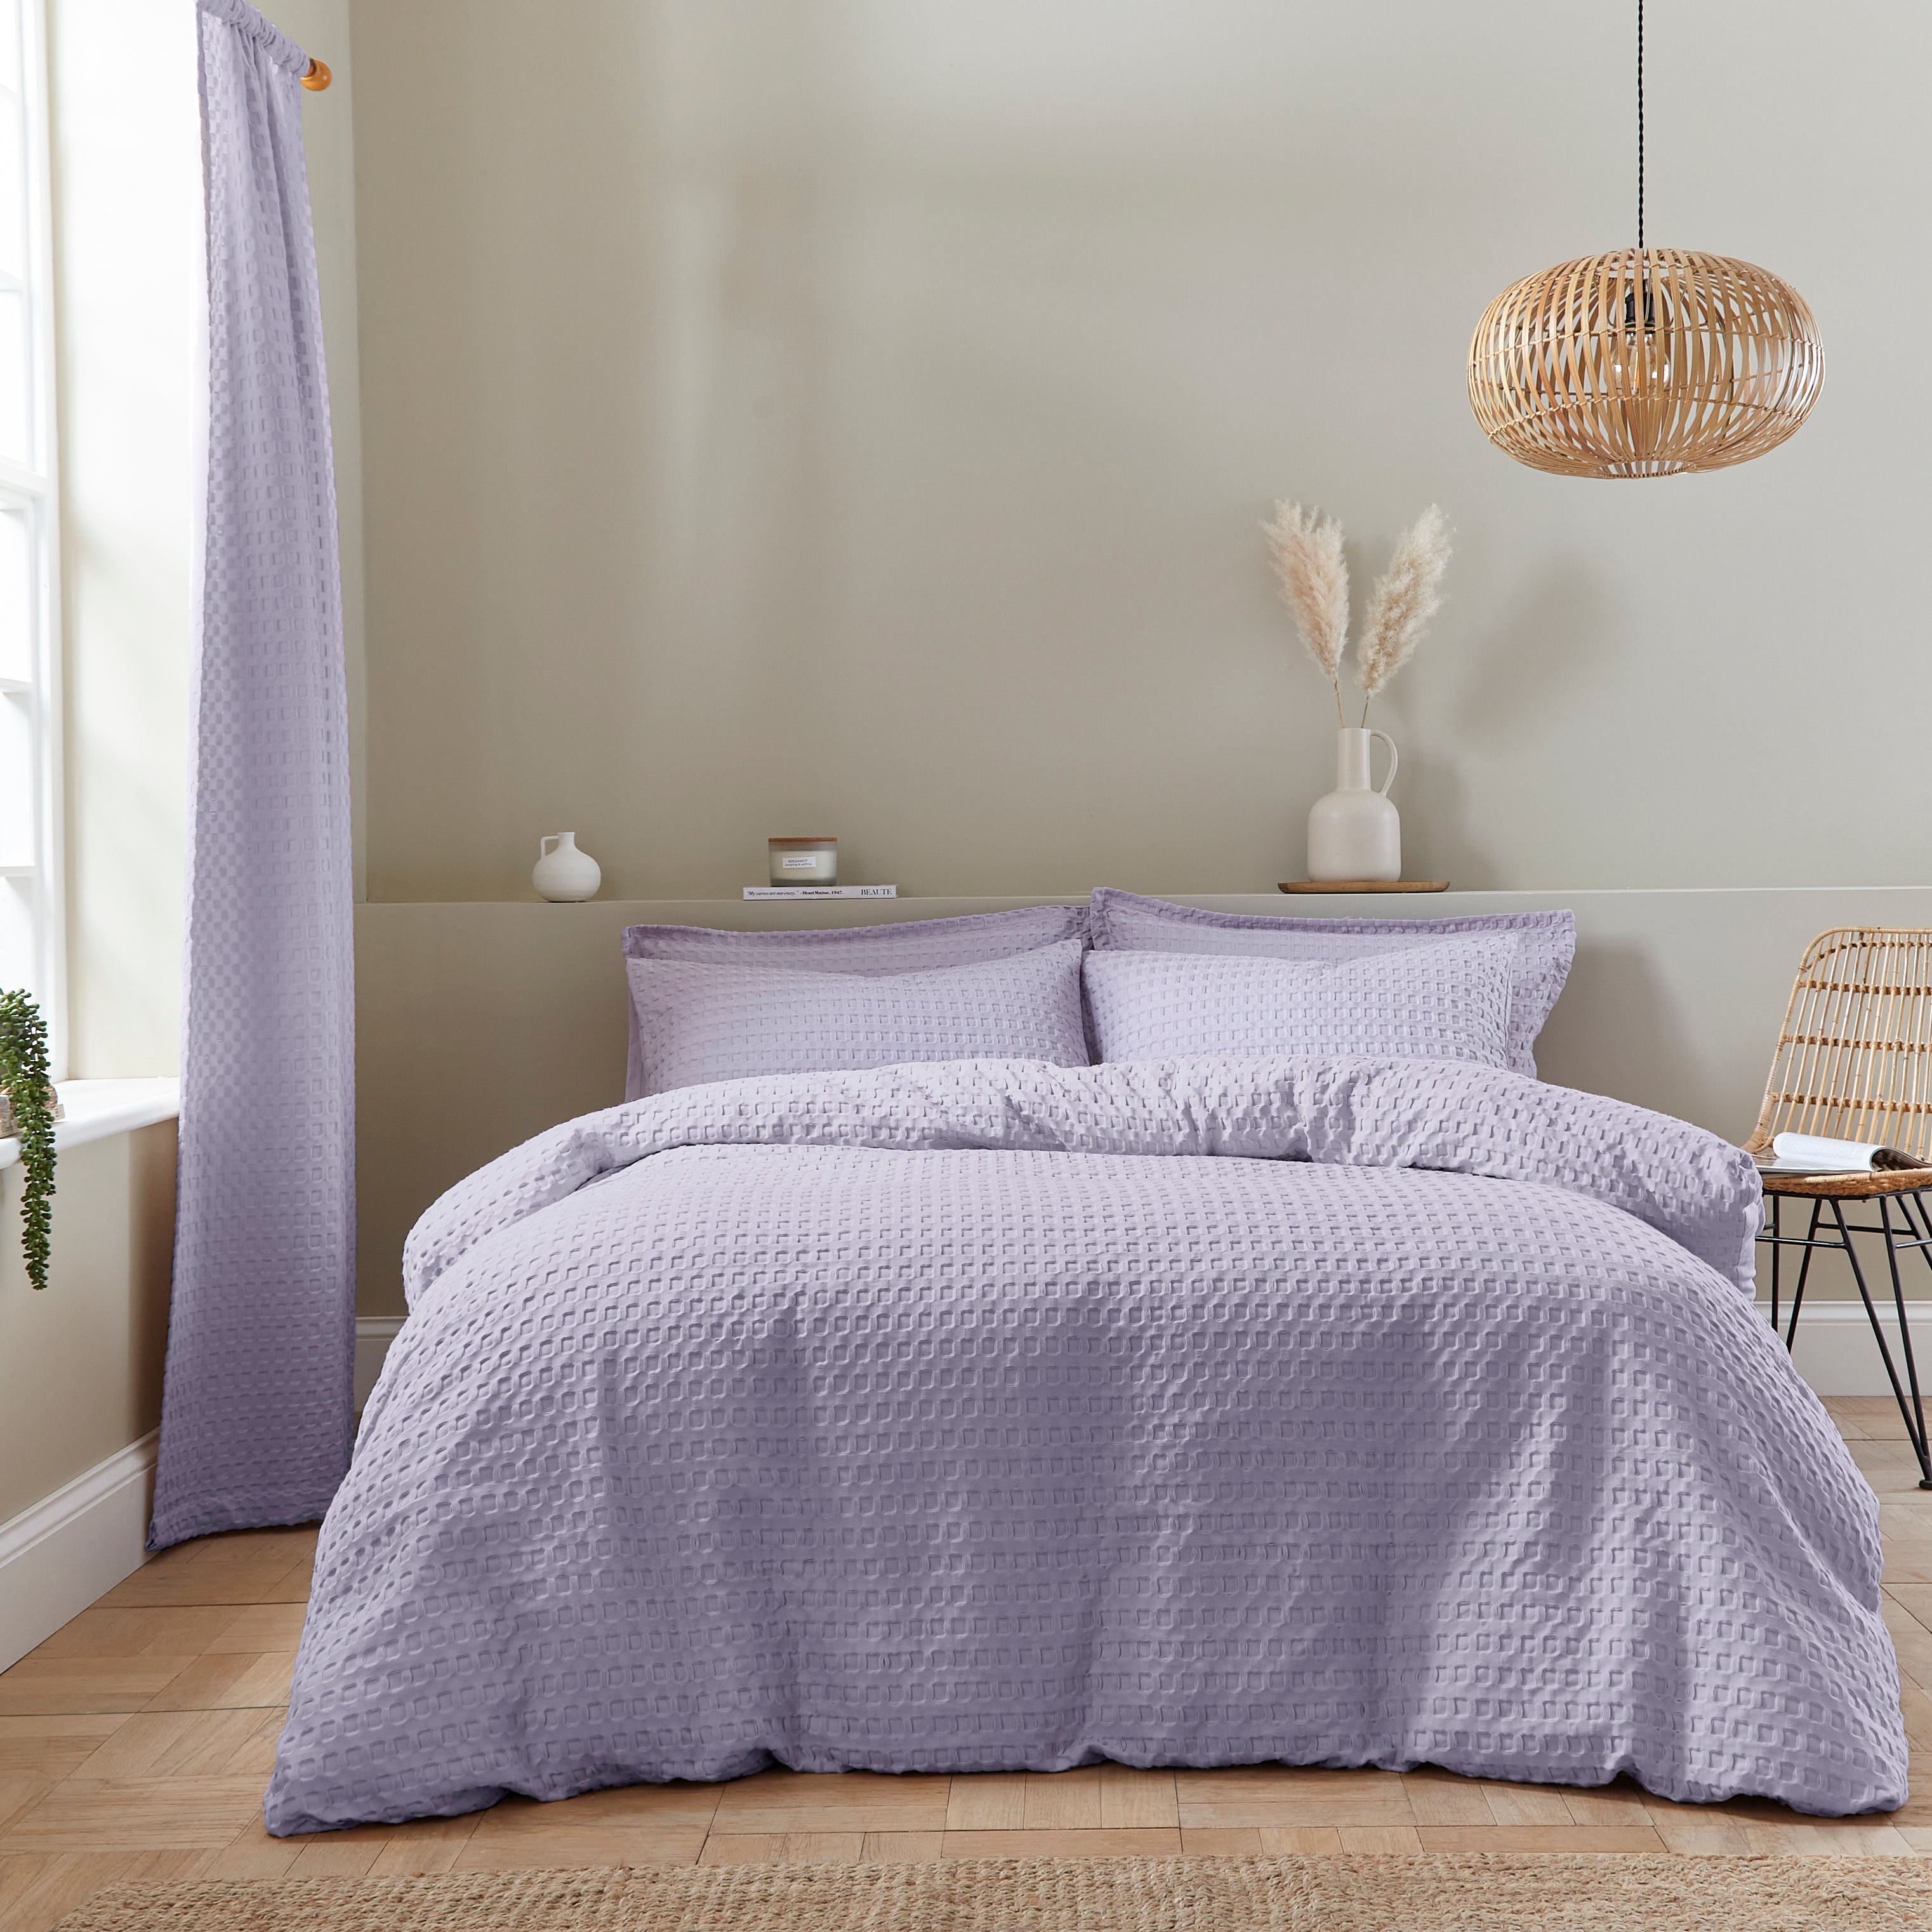 Emerson Waffle Duvet Cover and Pillowcase Set